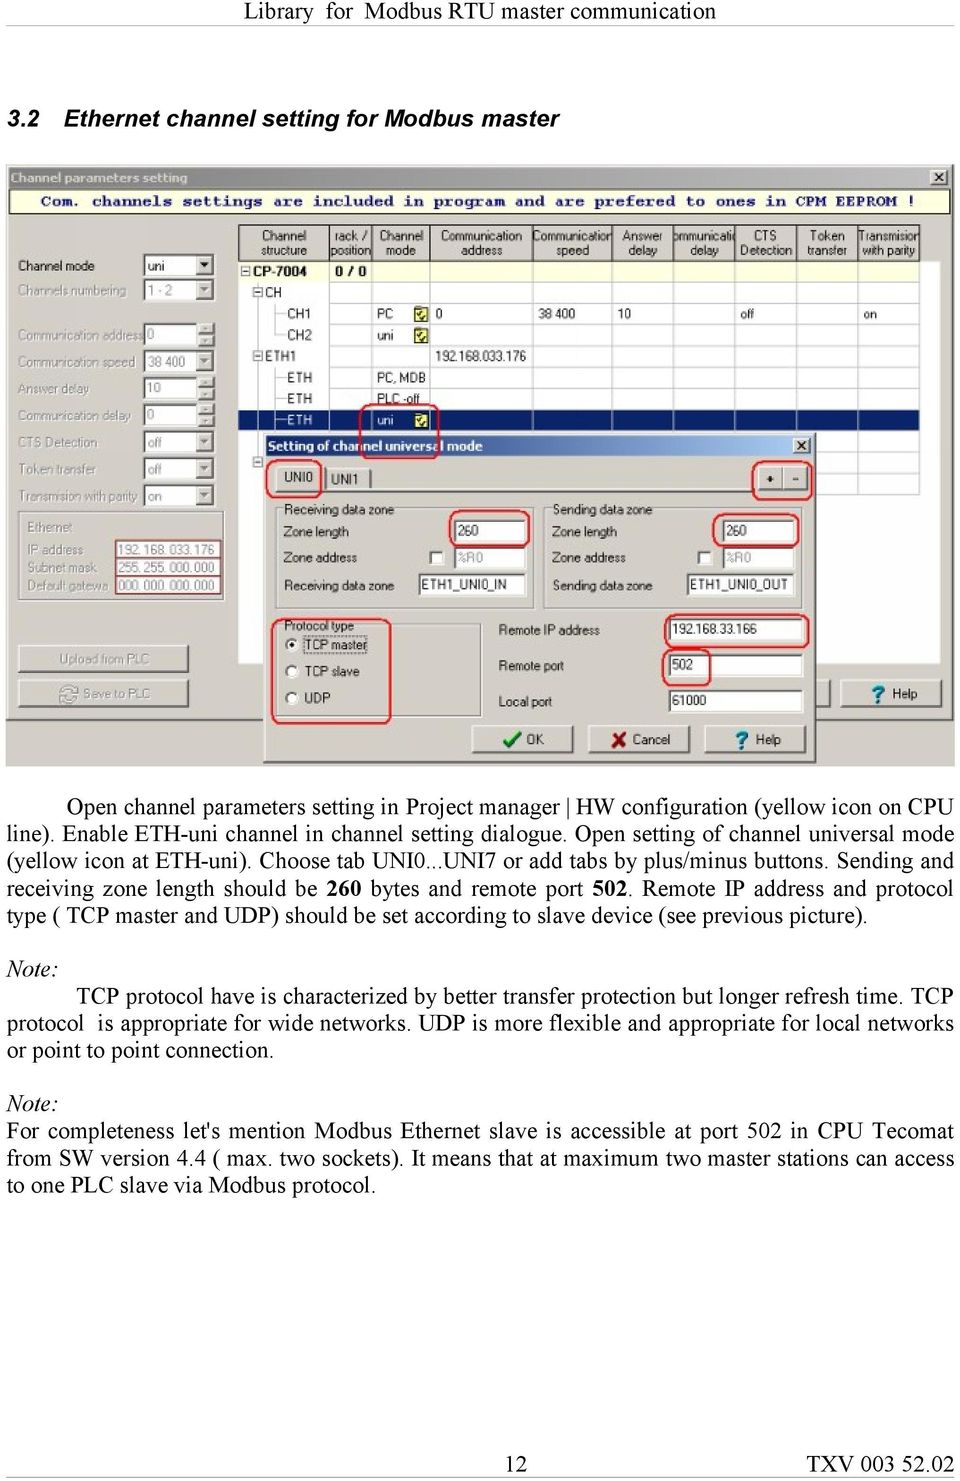 Remote IP address and protocol type ( TCP master and UDP) should be set according to slave device (see previous picture).